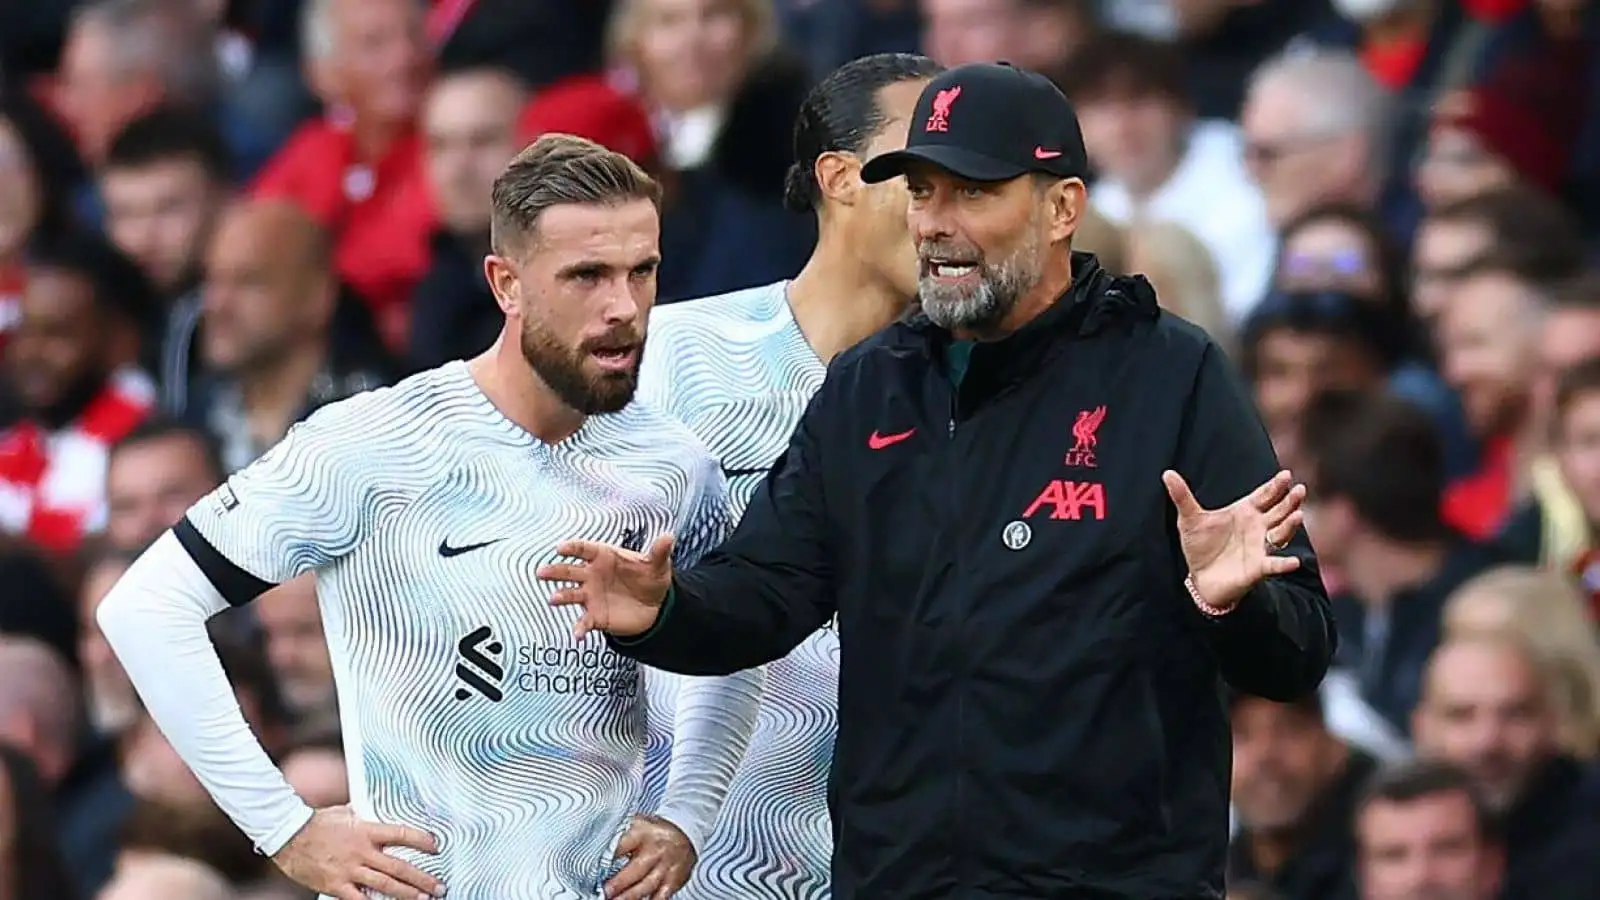 Jurgen Klopp manager of Liverpool with Jordan Henderson of Liverpool during the Premier League match at the Emirates Stadium, London